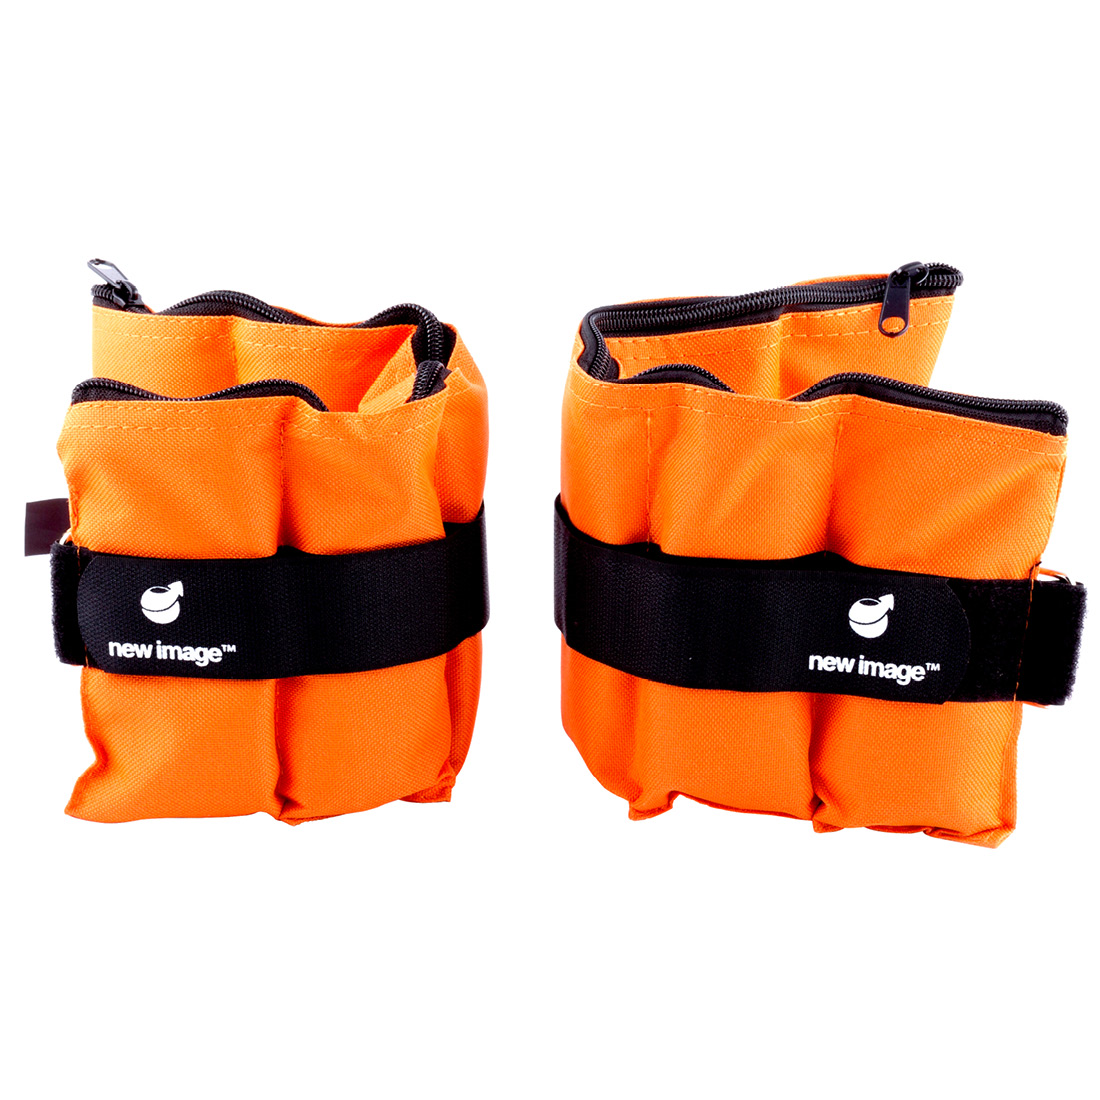 An image of Ankle Weights (2 x 1kg) by New Image - Orange